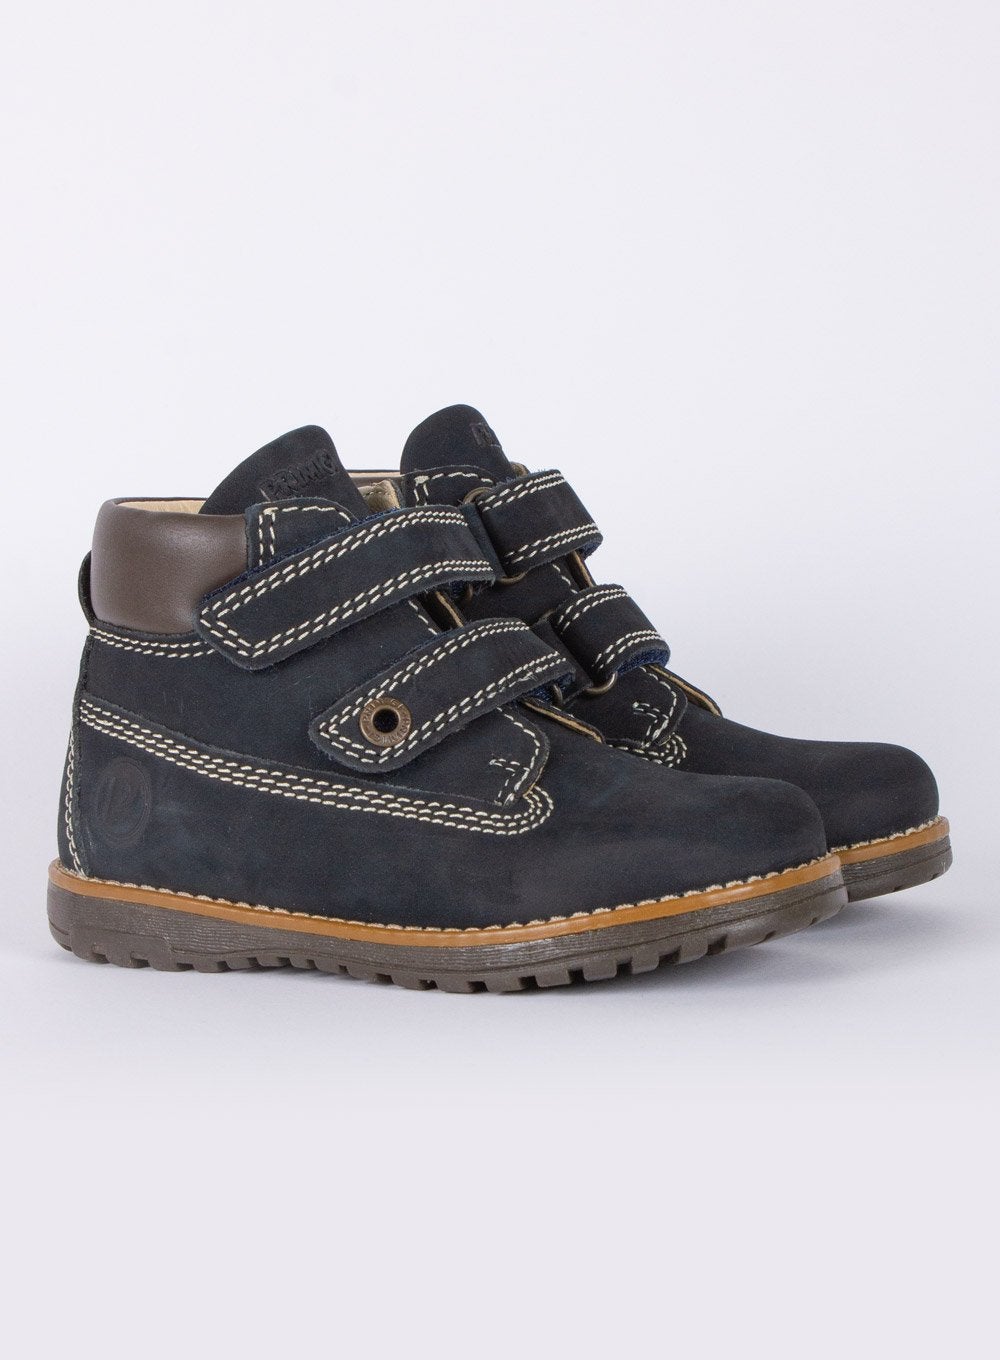 Blue Aspy Boots | Trotters Childrenswear